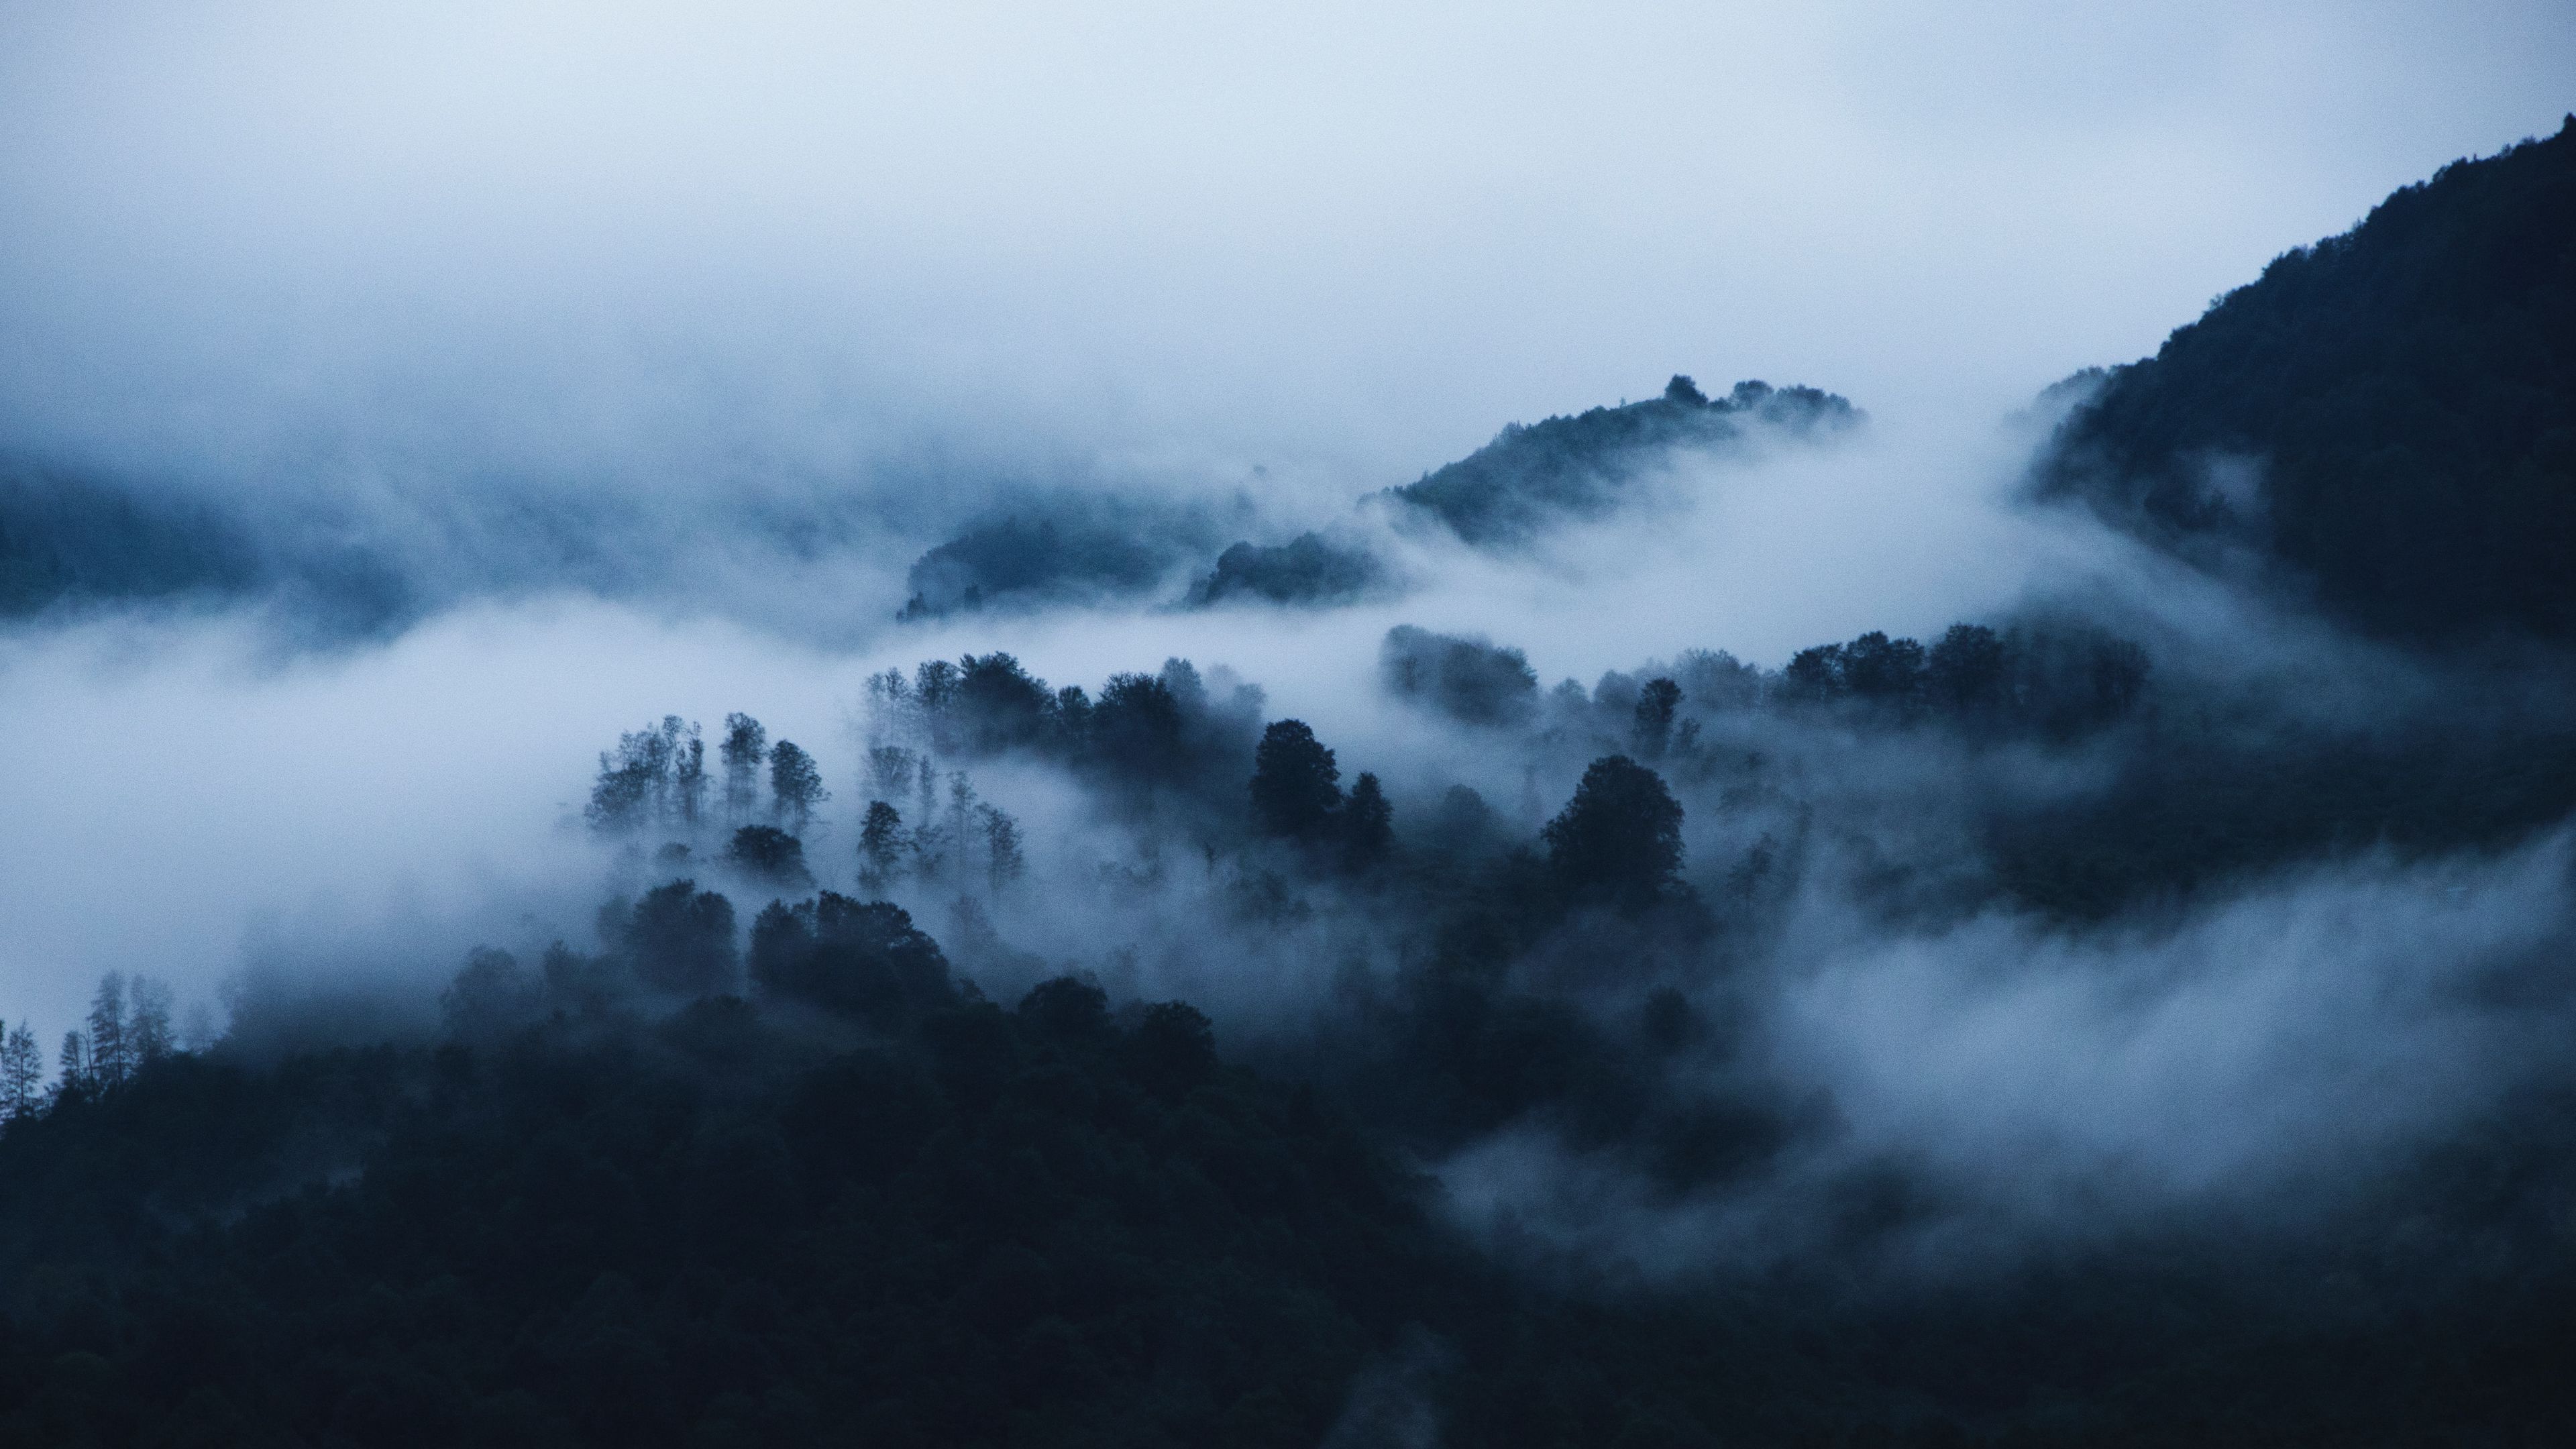 Wallpaper id mountains fog clouds trees landscape k free download